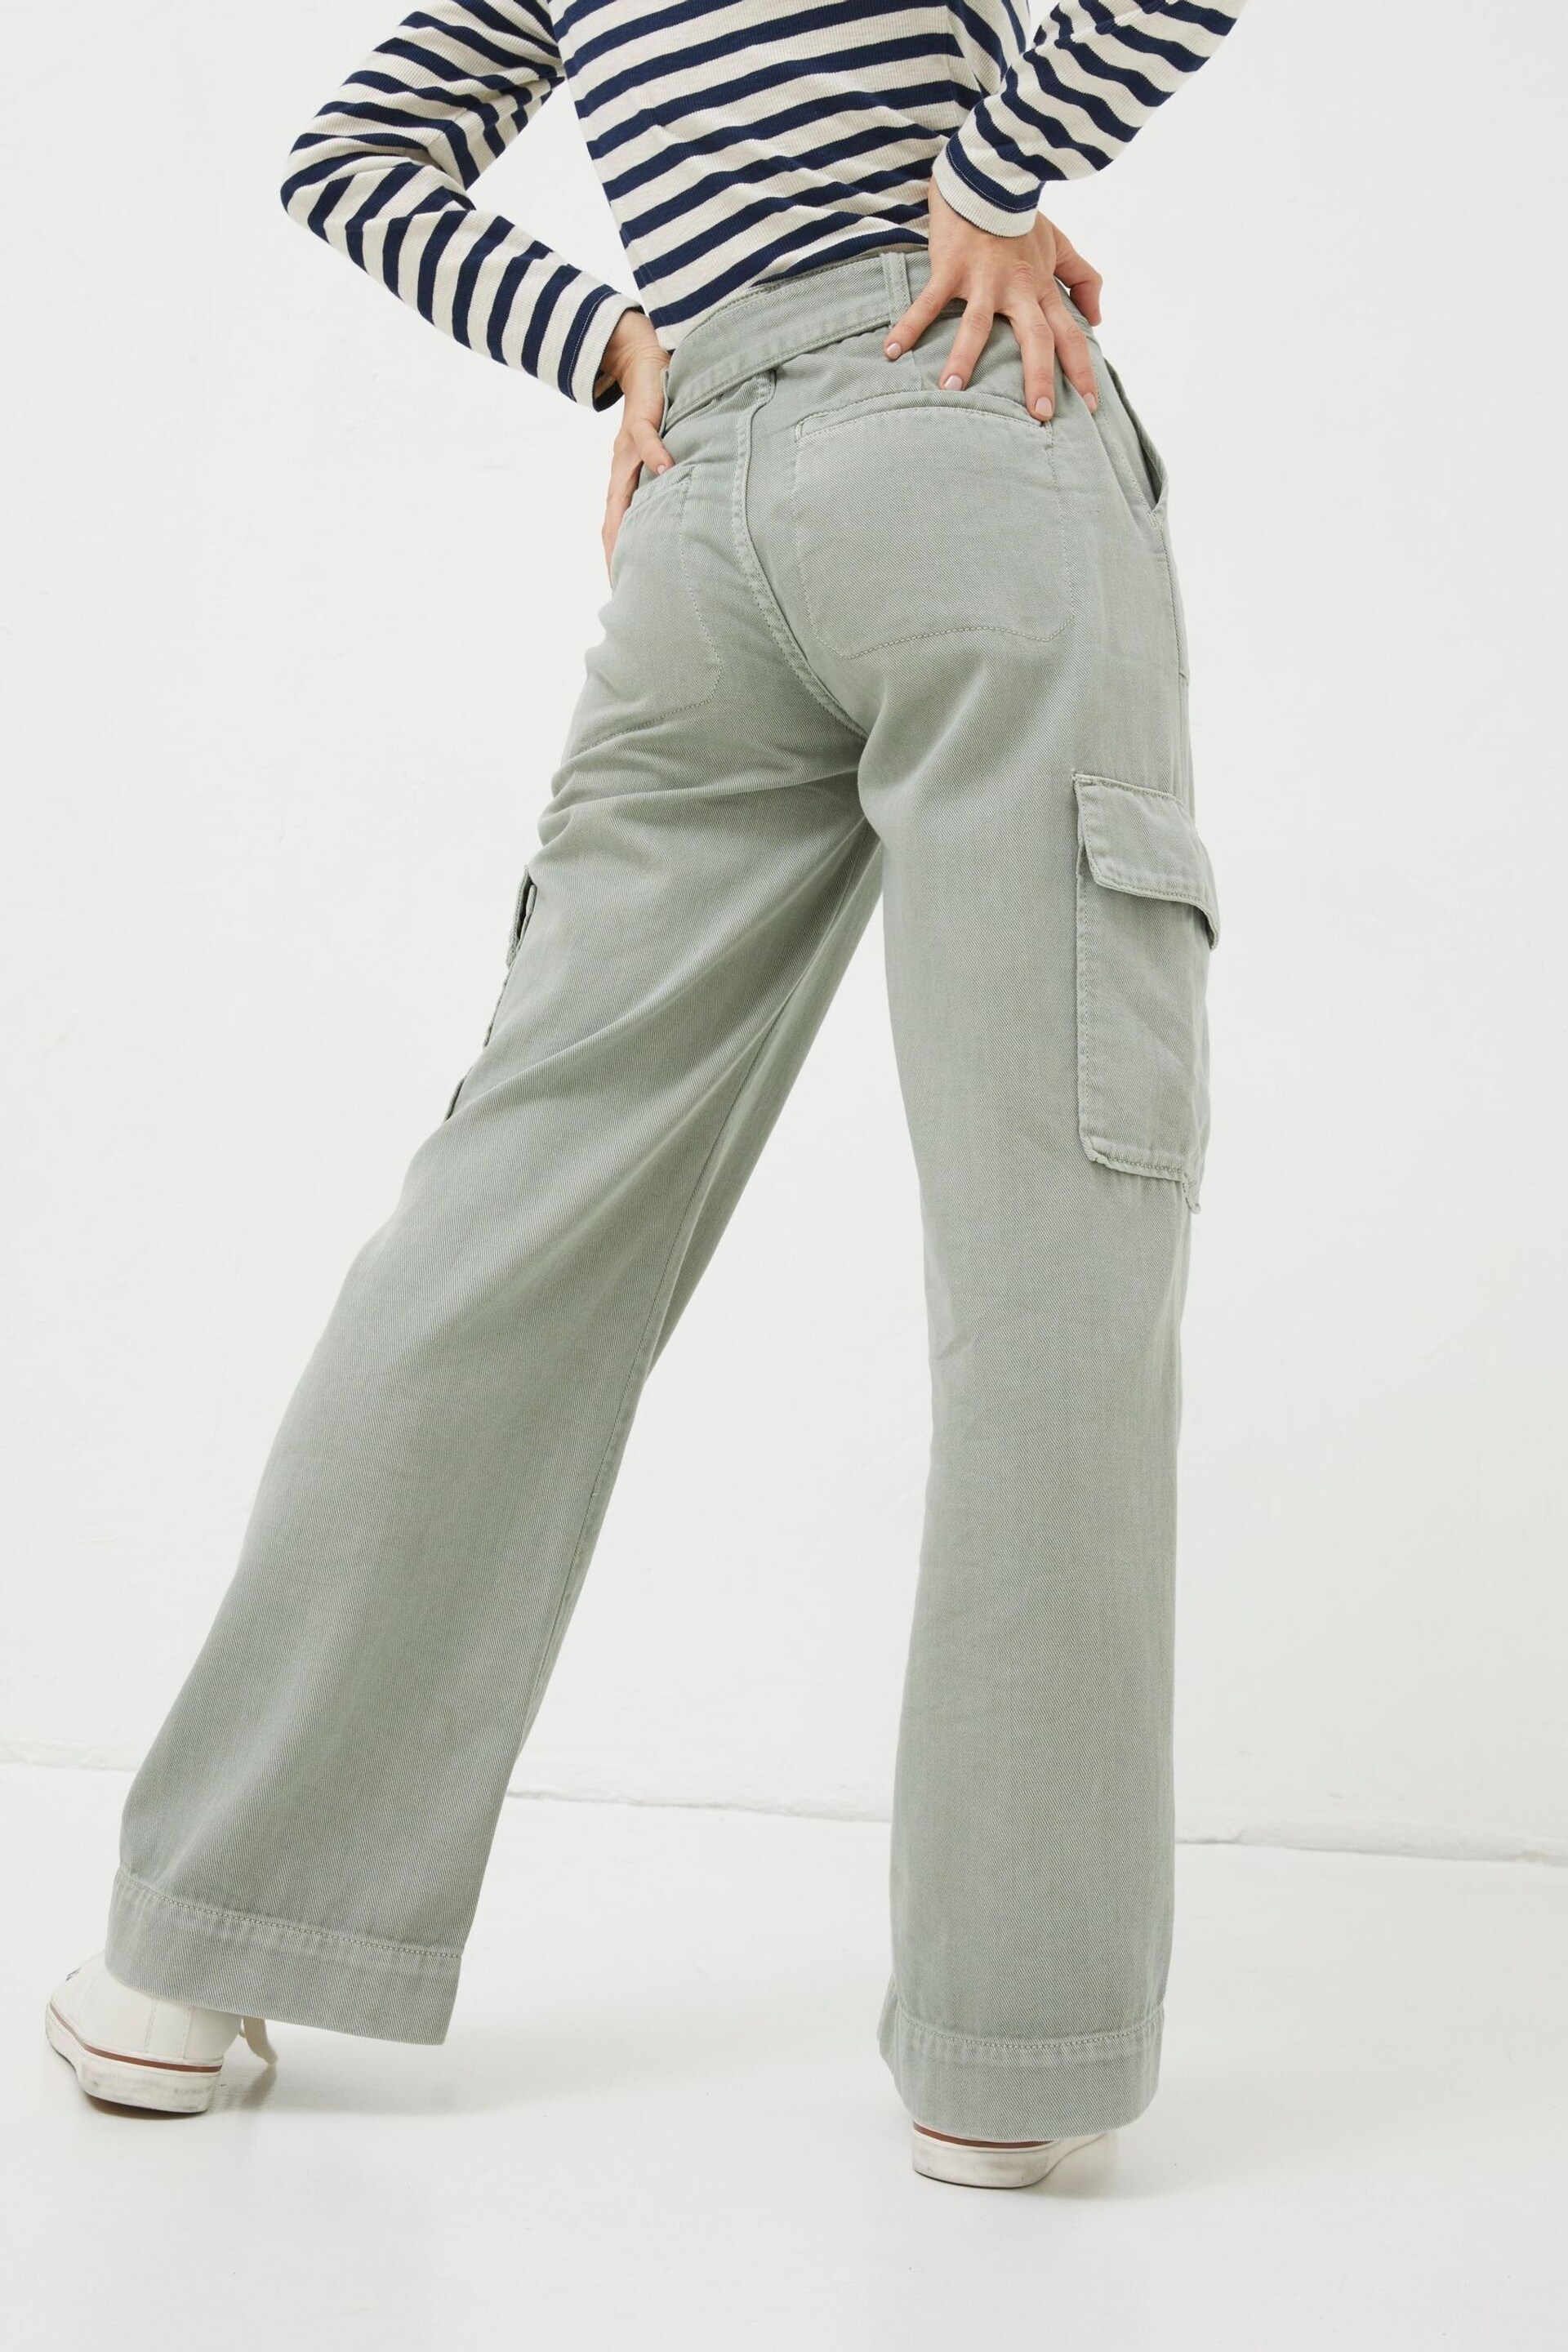 FatFace Green Bodi Belted Cargo Trousers - Image 2 of 5